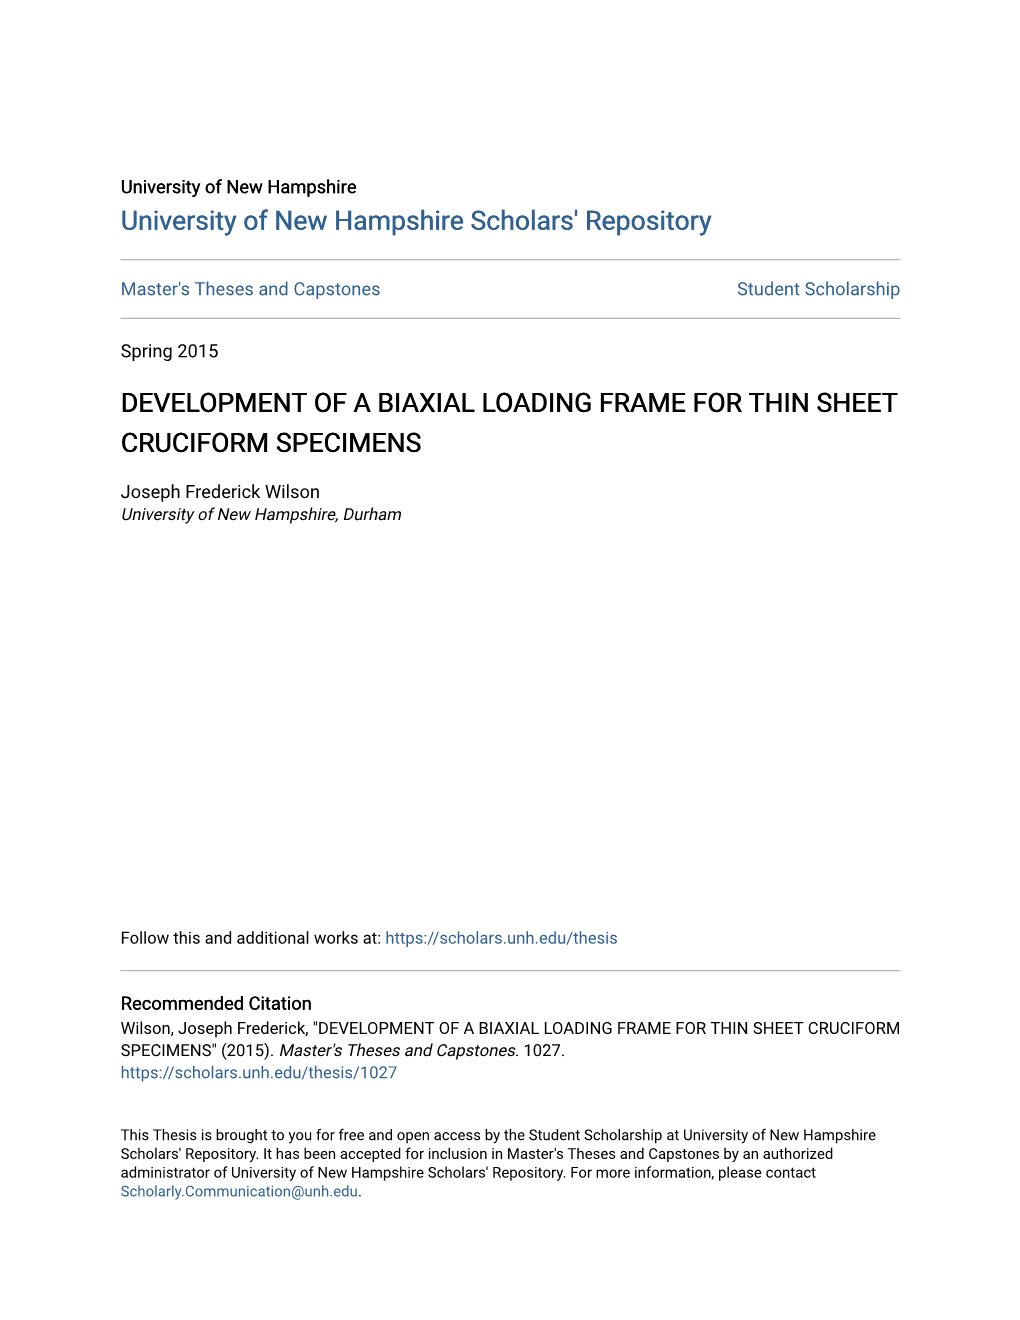 Development of a Biaxial Loading Frame for Thin Sheet Cruciform Specimens